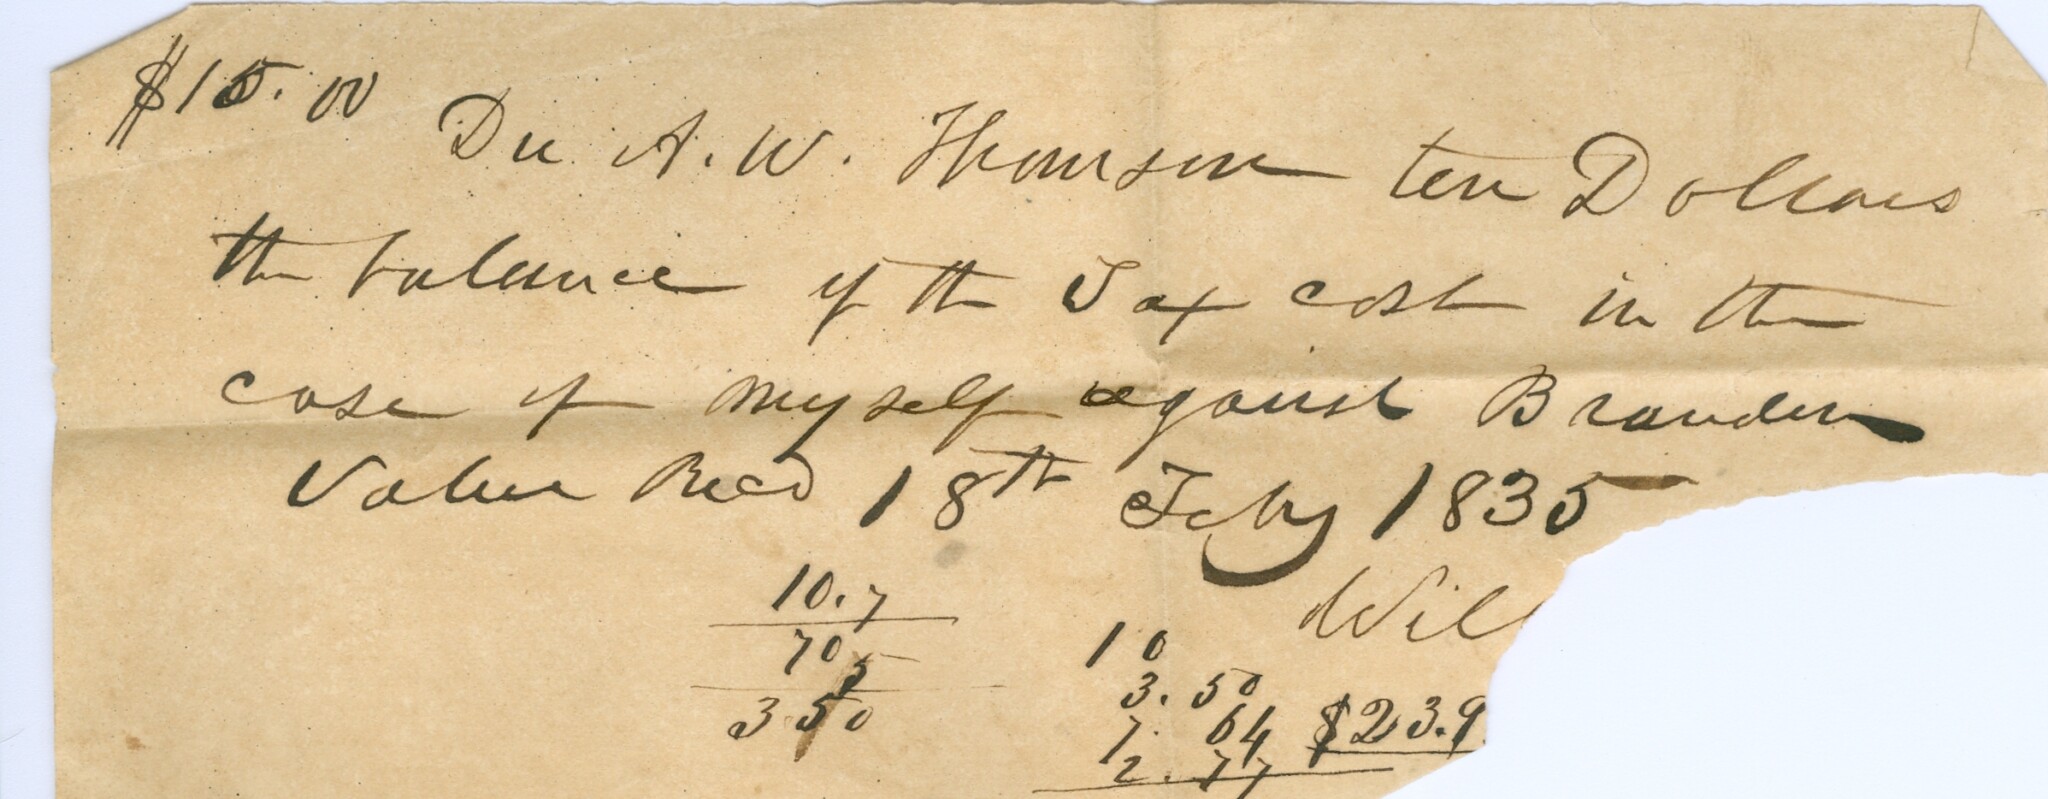 A.W. Thomson pd $15. by Wm. Kelly 1835 for services as his attorney.